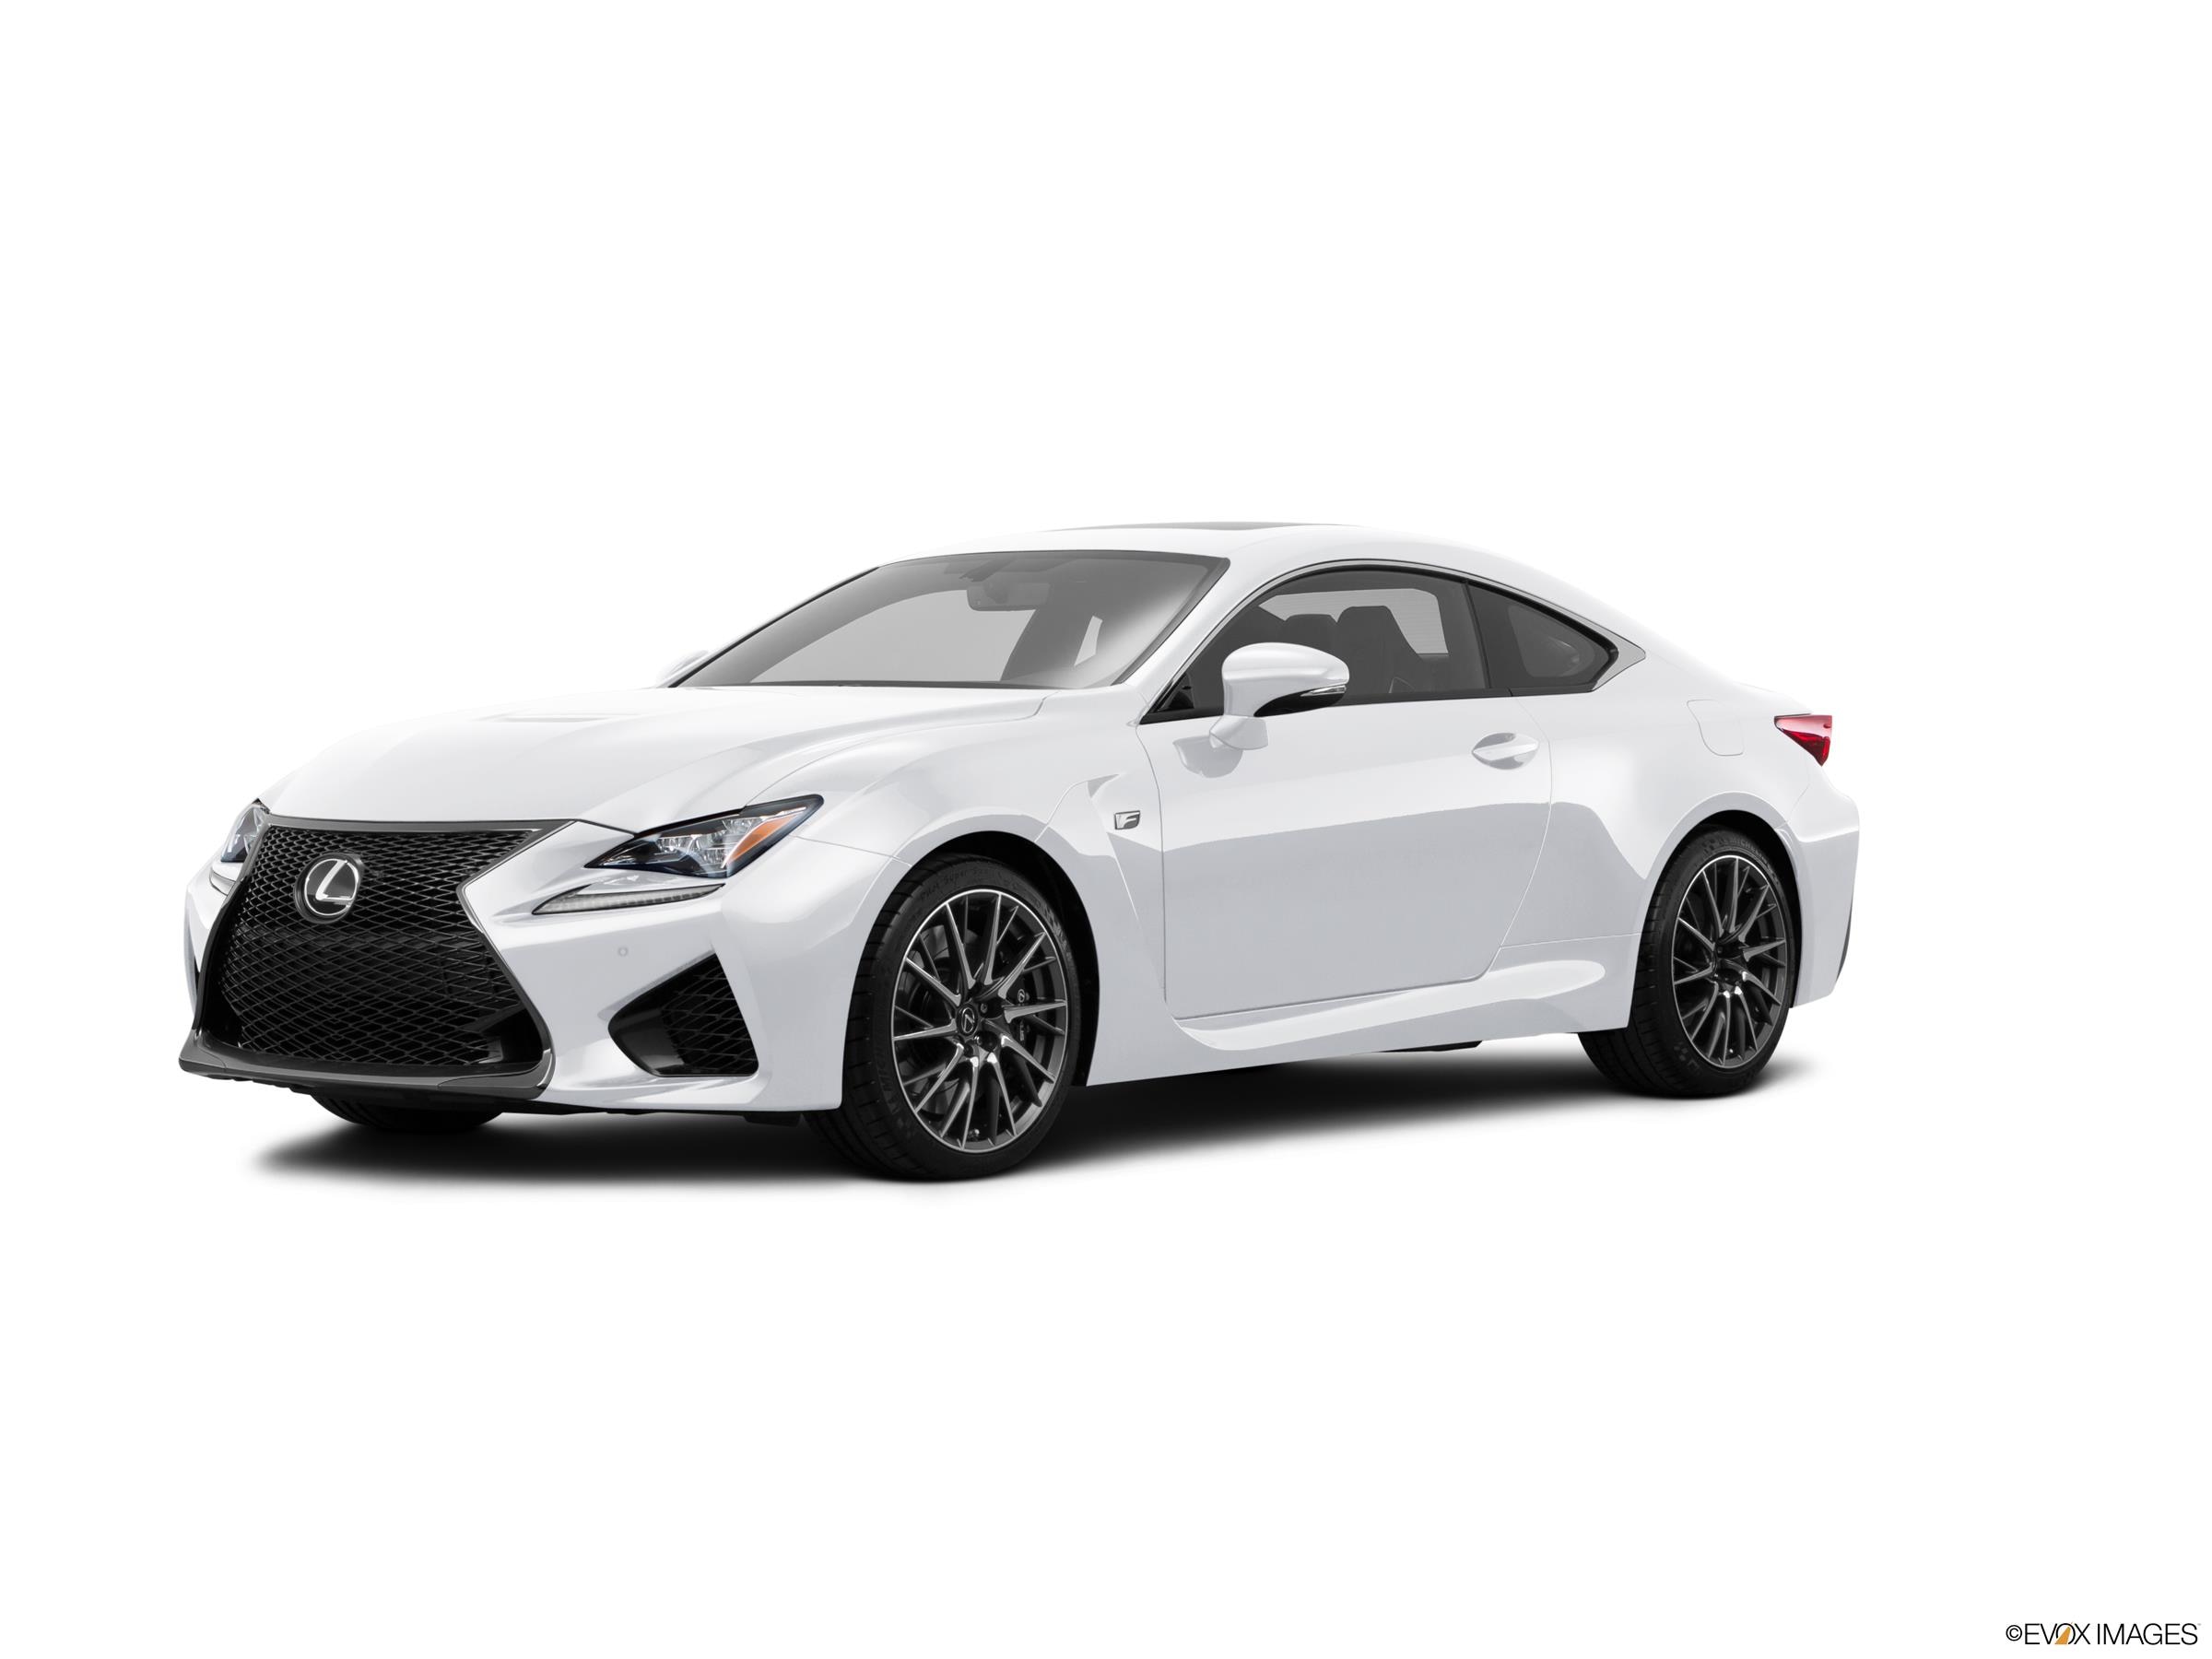 2016 Lexus RC F Research, photos, specs, and expertise | CarMax